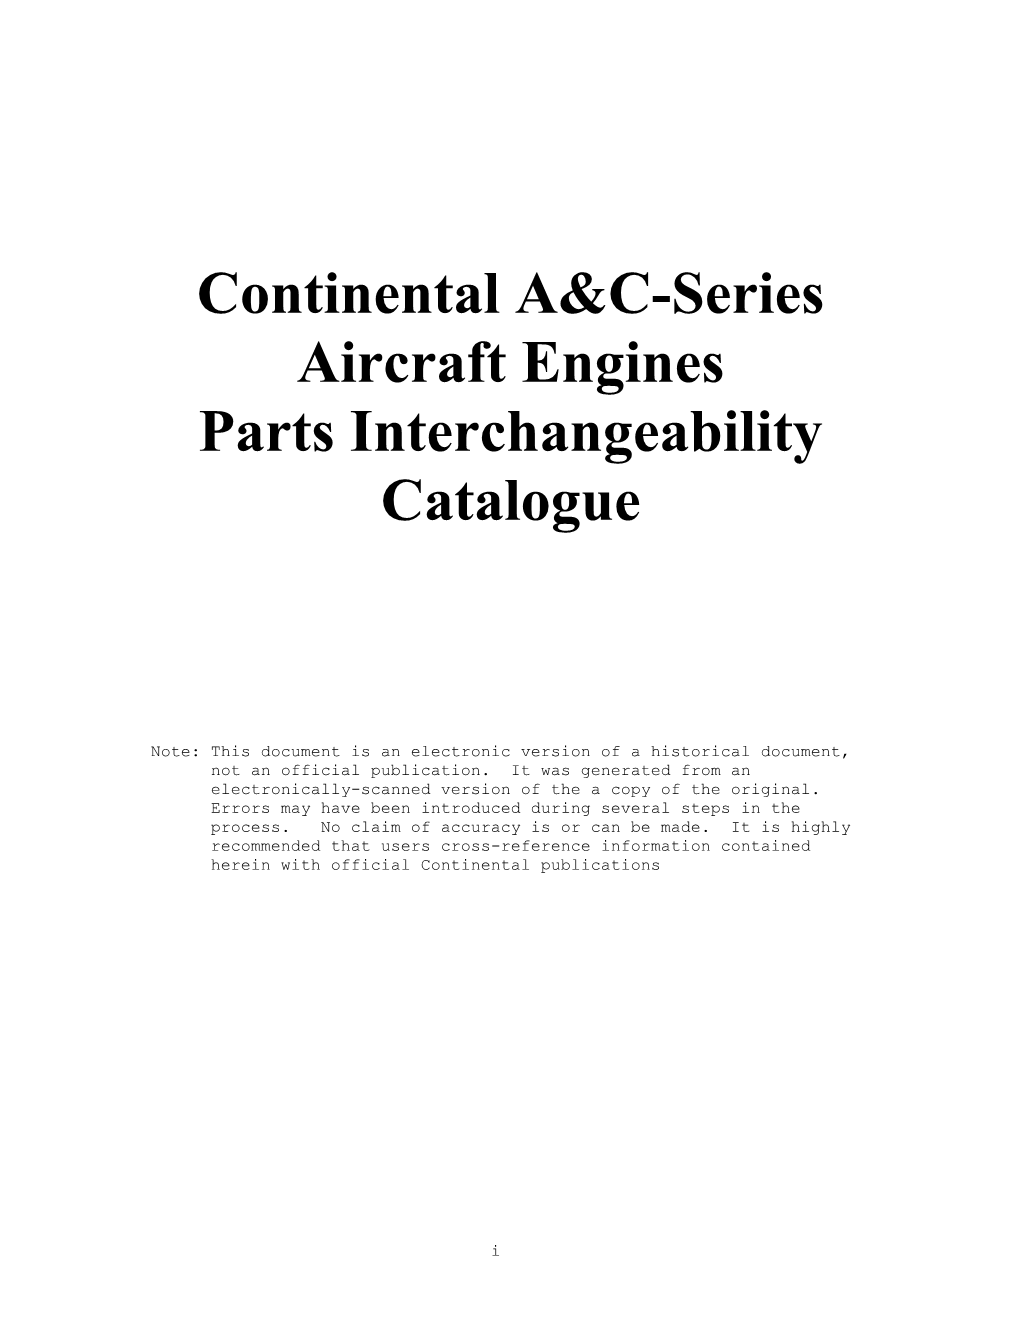 Continental A&C-Series Aircraft Engines